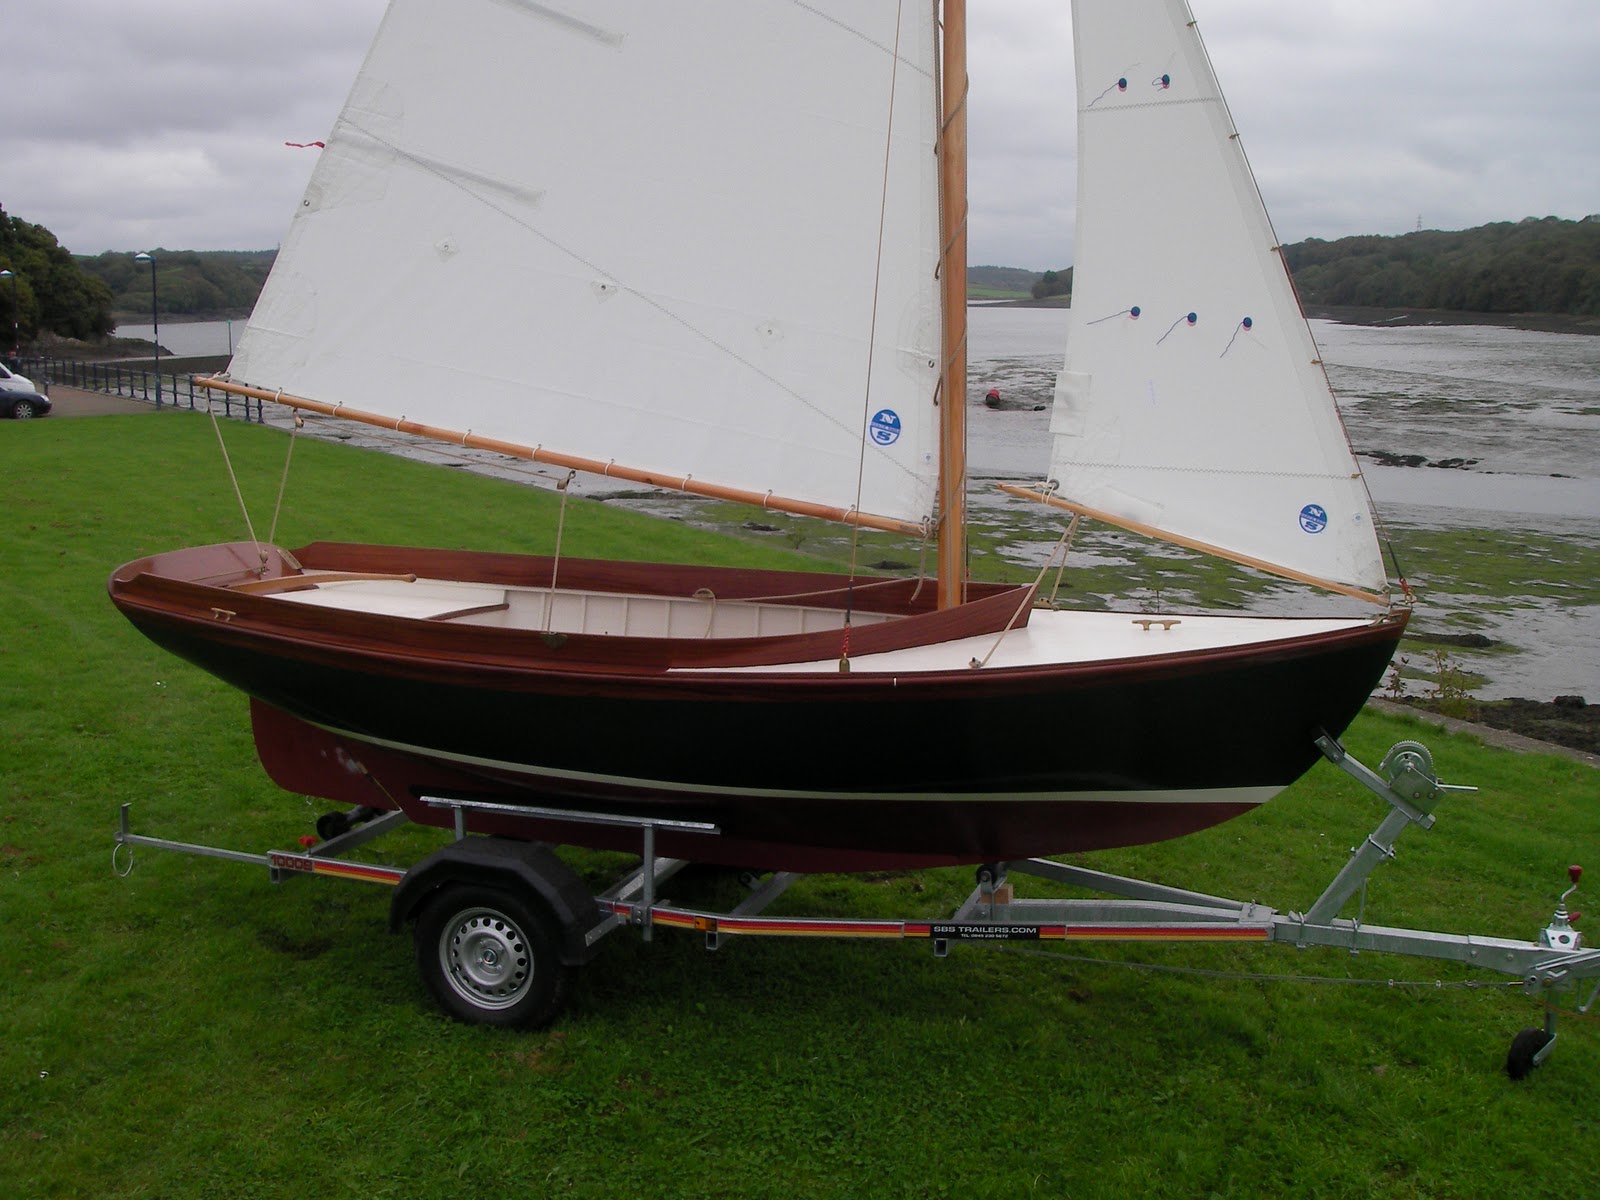 butler & co boats for sale: the haven 12.5 - a ‘proper